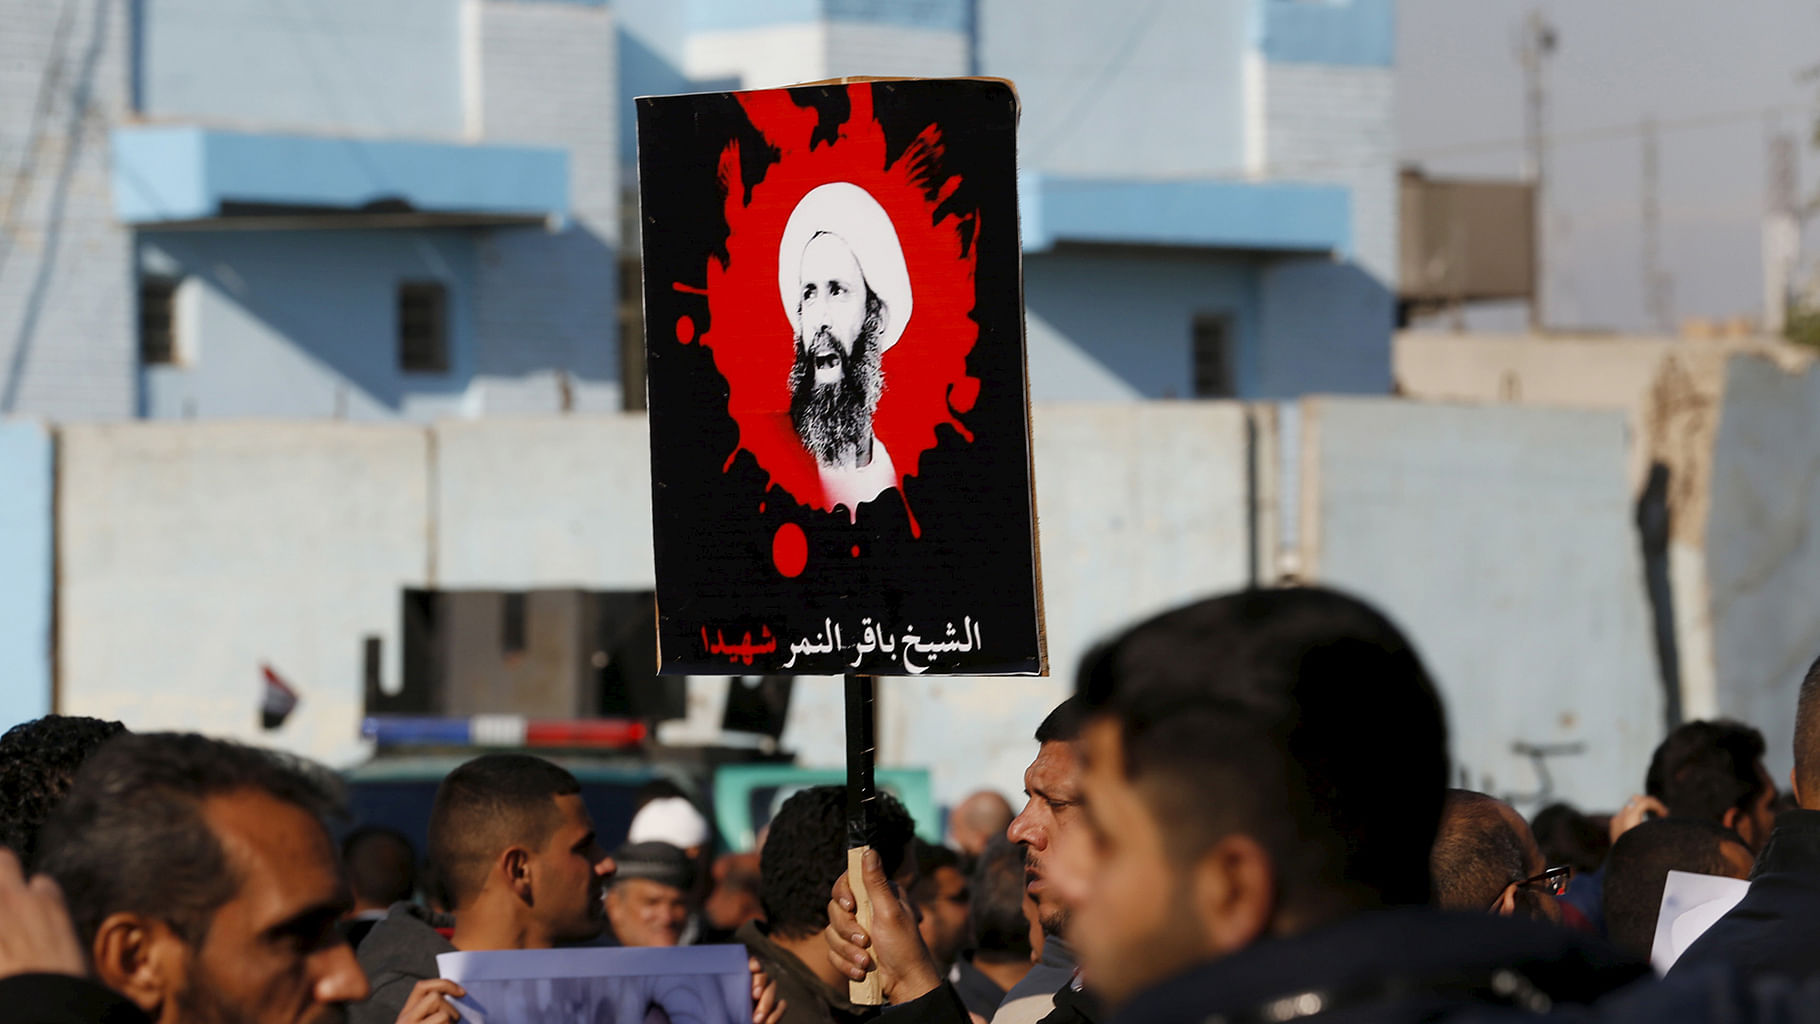 Supporters of Shi’ite cleric Moqtada al-Sadr protest against the execution of Shi’ite Muslim cleric Nimr al-Nimr in Saudi Arabia. (Photo: Reuters)